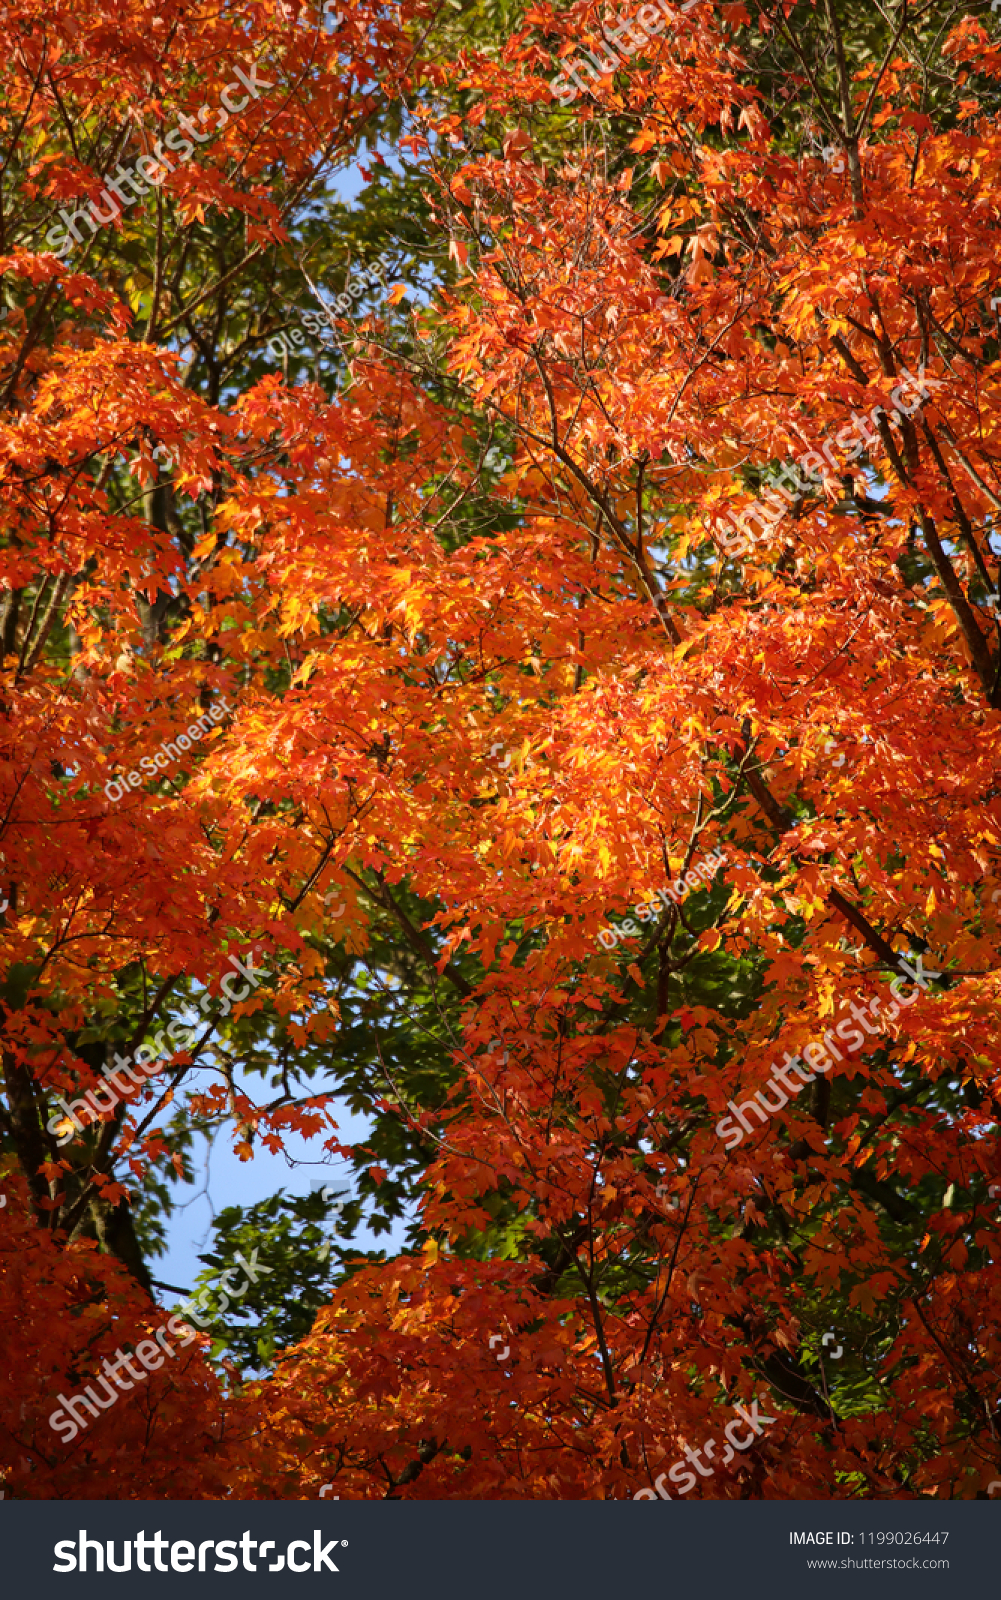 Beautiful red-orange colored leaves of the Sugar Maple tree (Acer saccharum) #1199026447